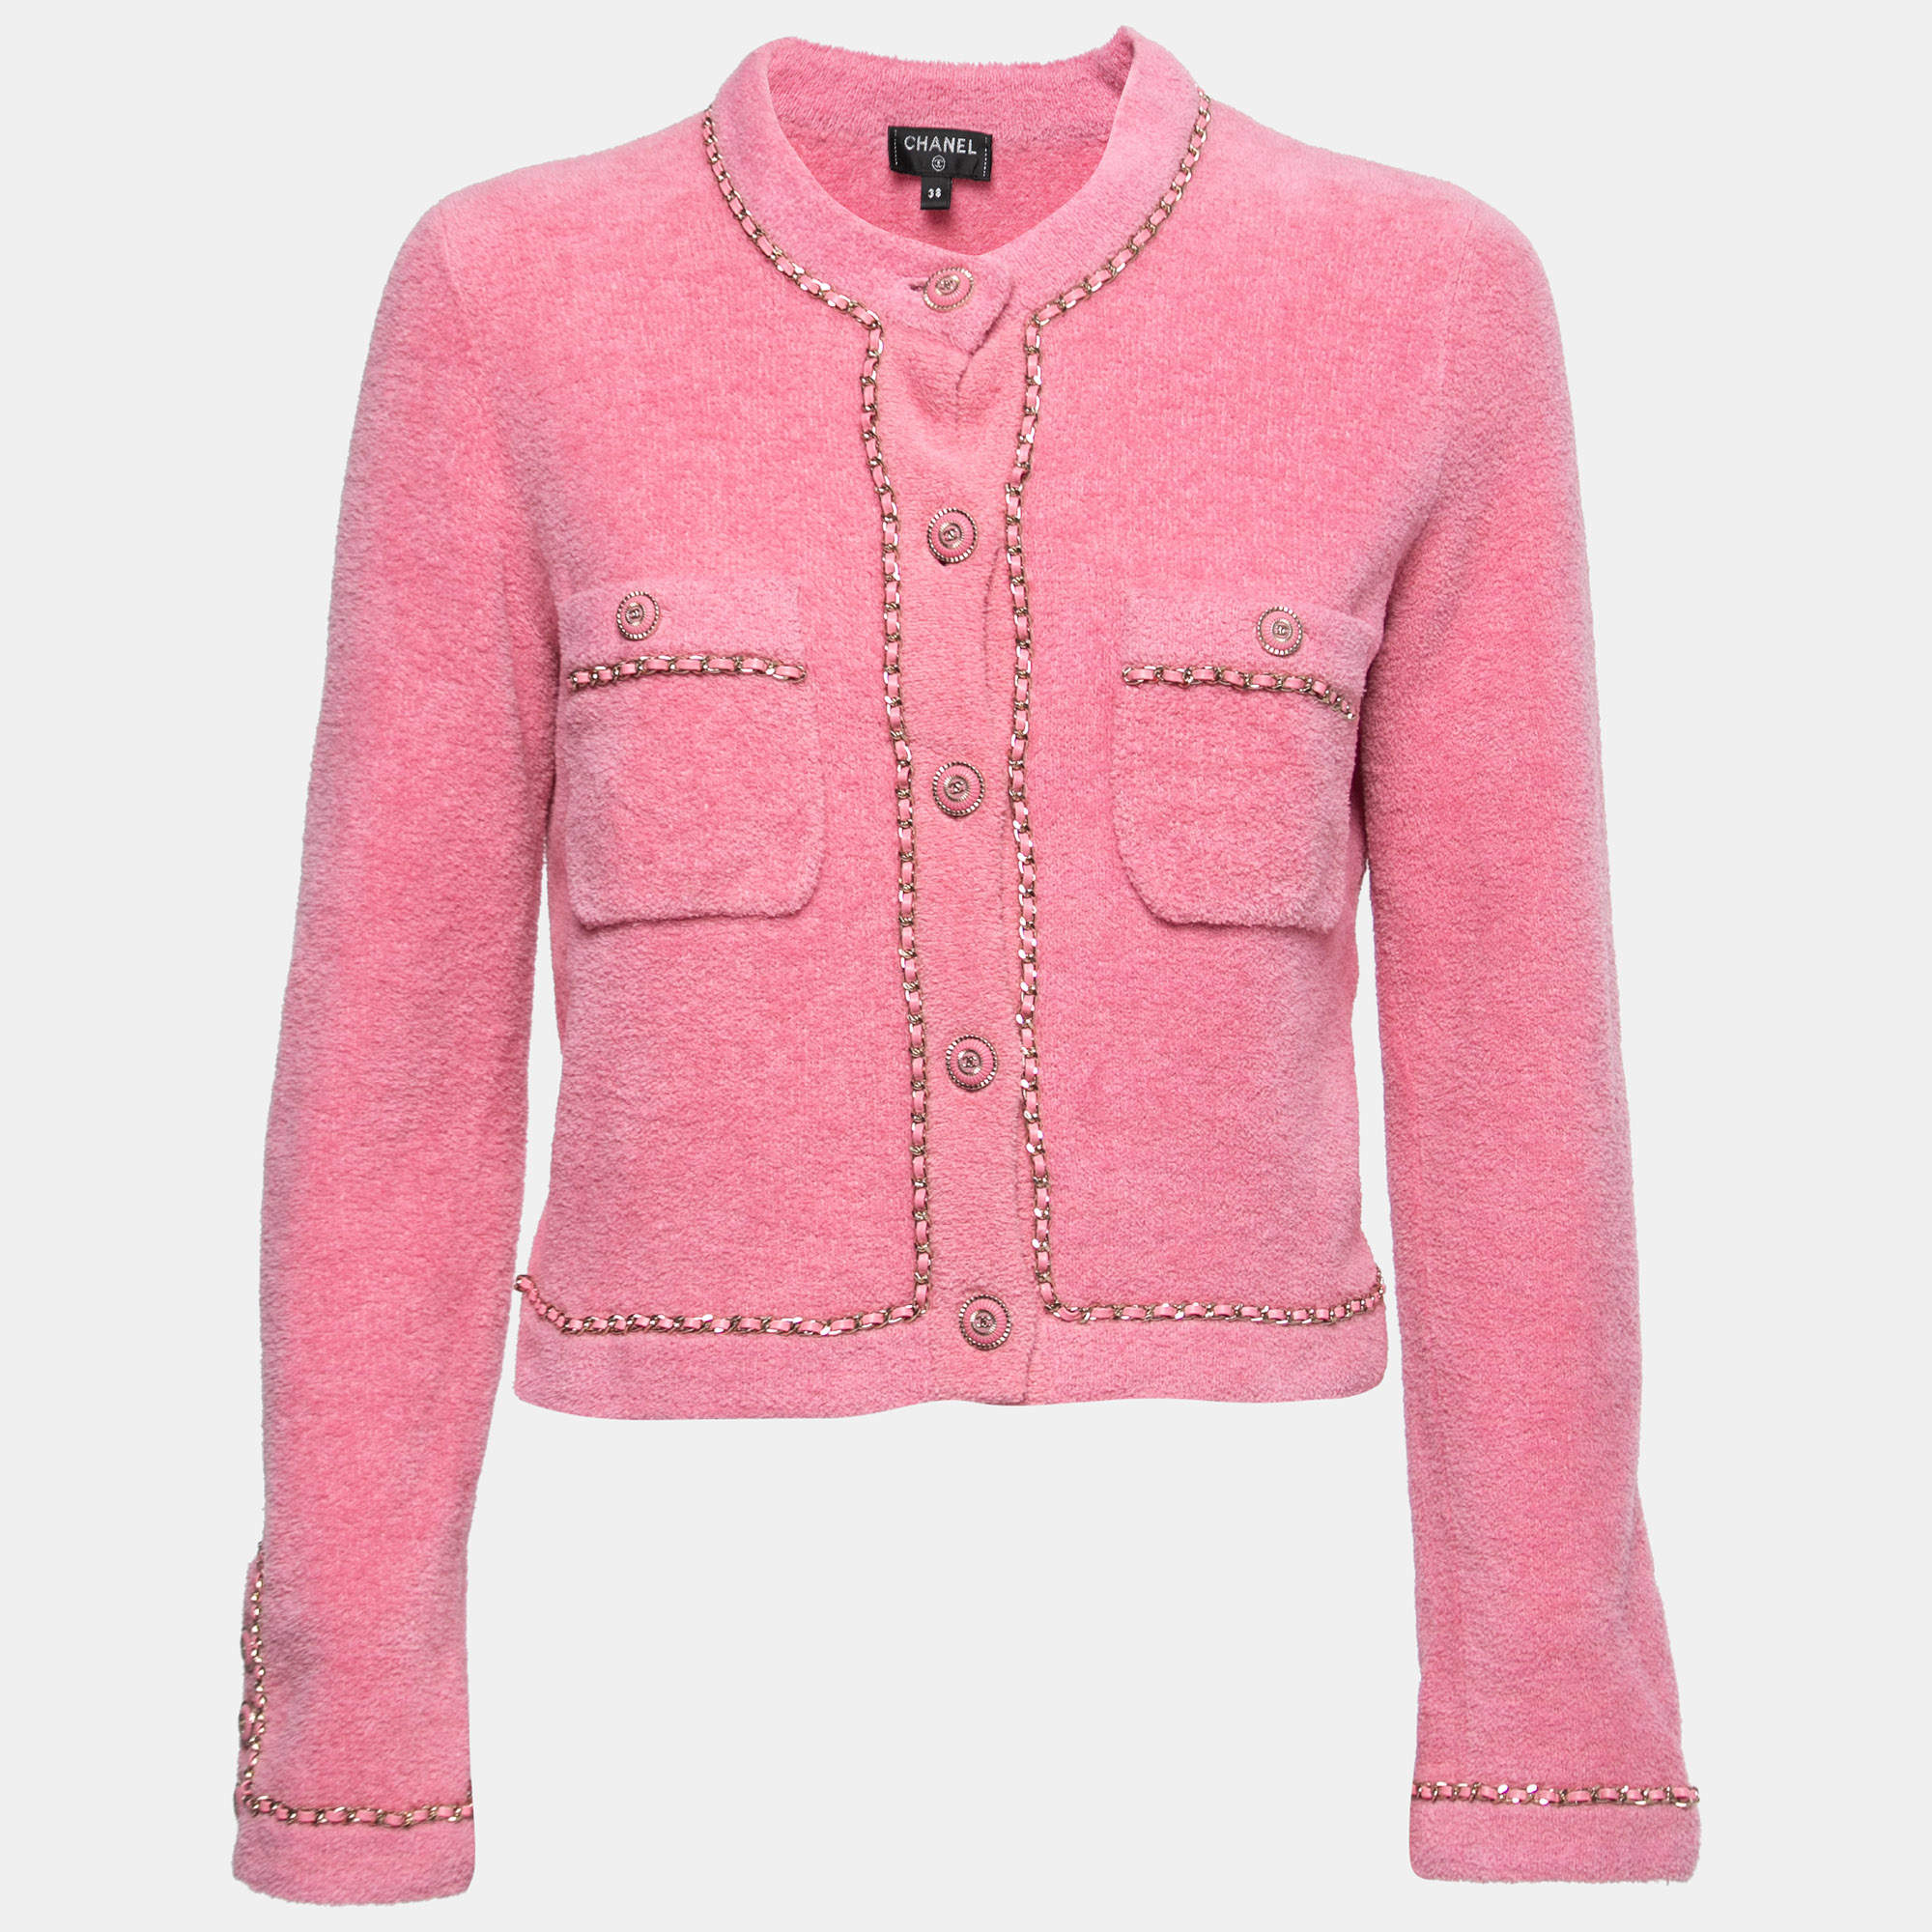 Chanel Pink Terry Chain Link Accent Jacket M Chanel | The Luxury Closet